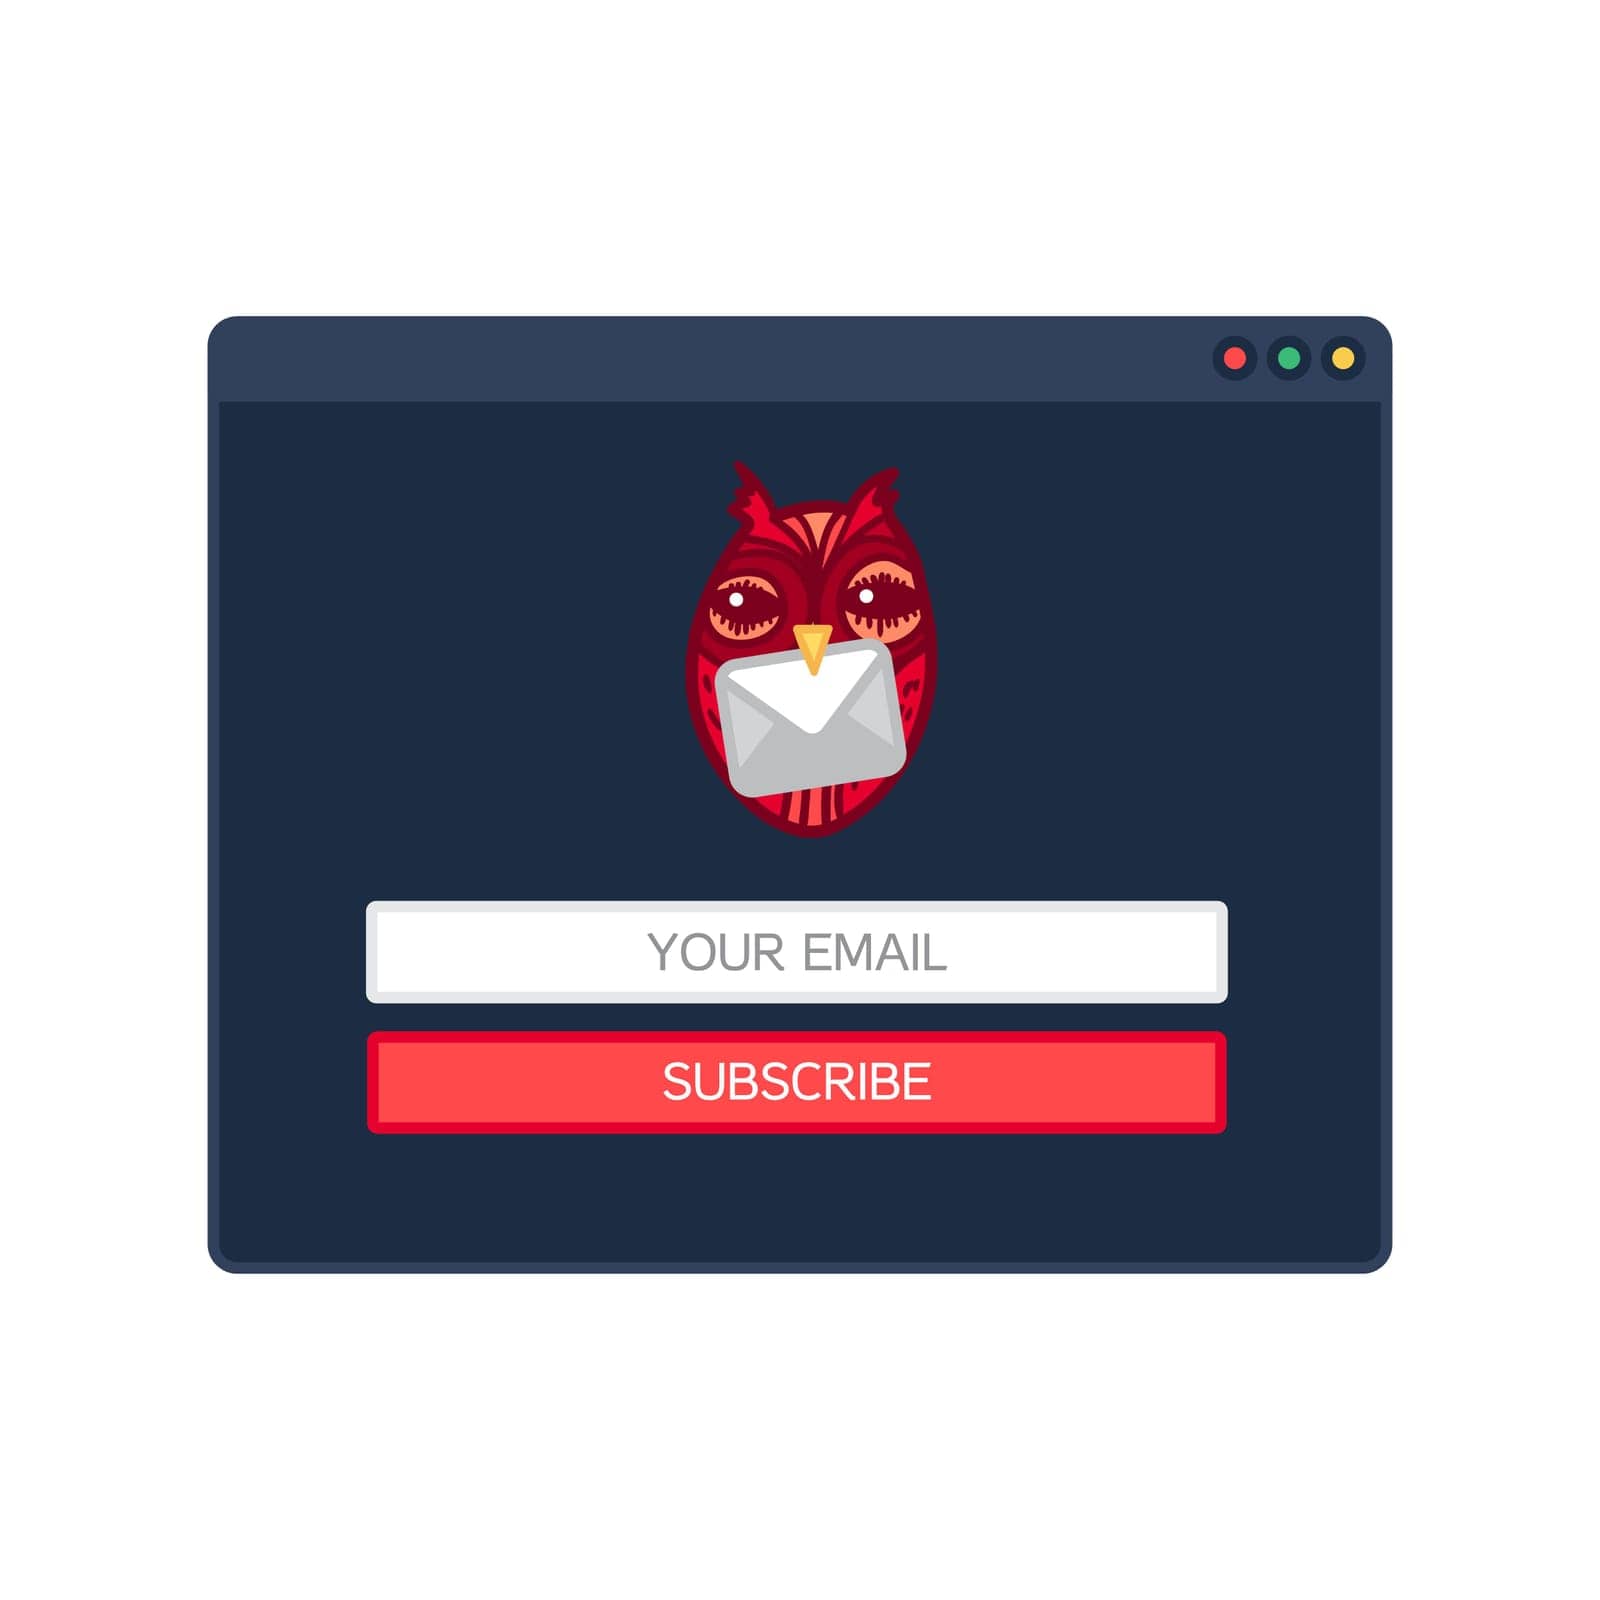 Web Template, Web Elements for site form of email subscribe, newsletter with Fun Owl. Vector